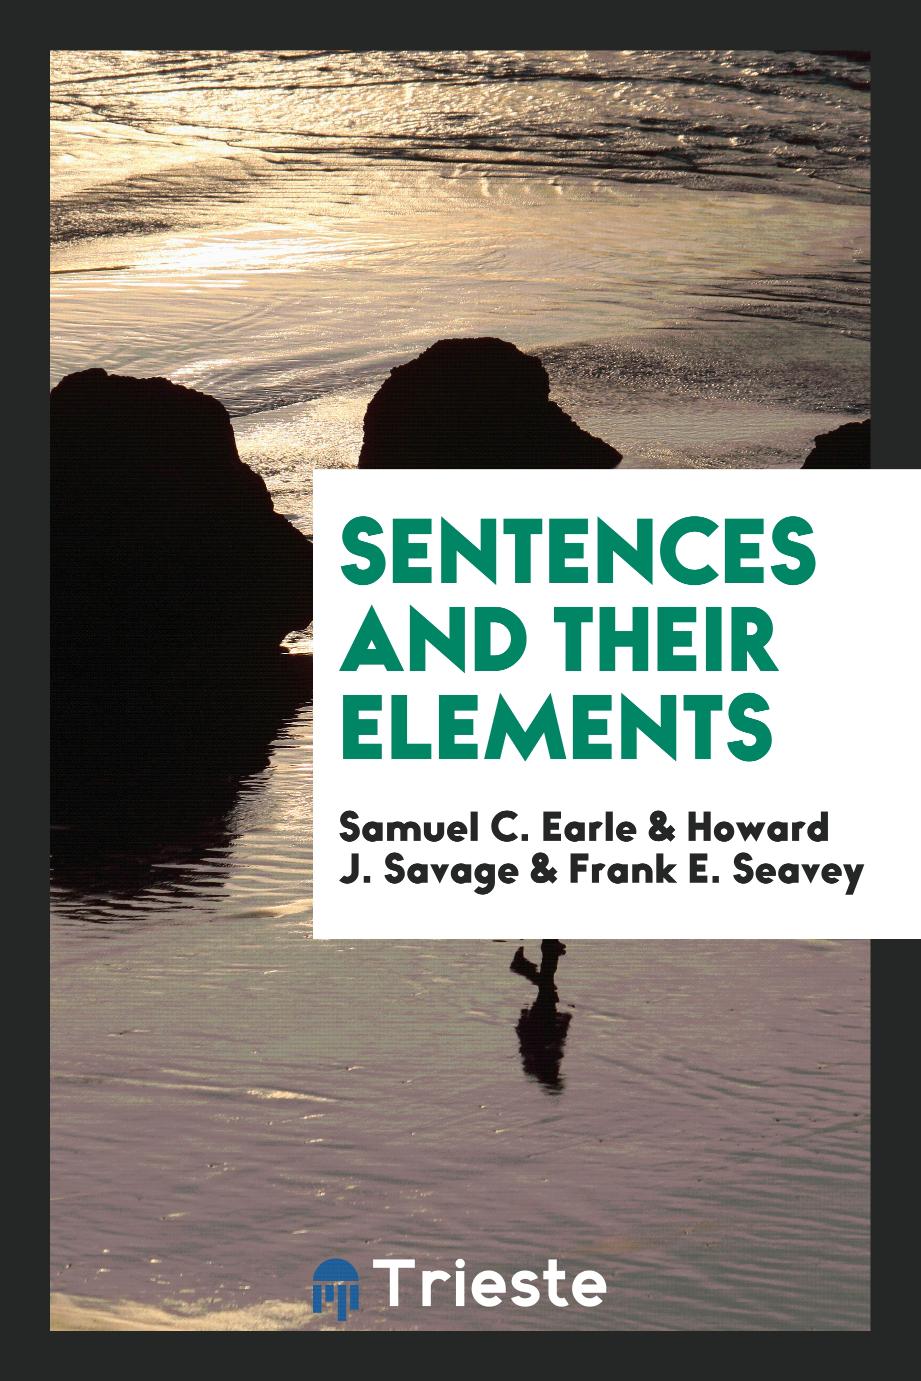 Sentences and their elements